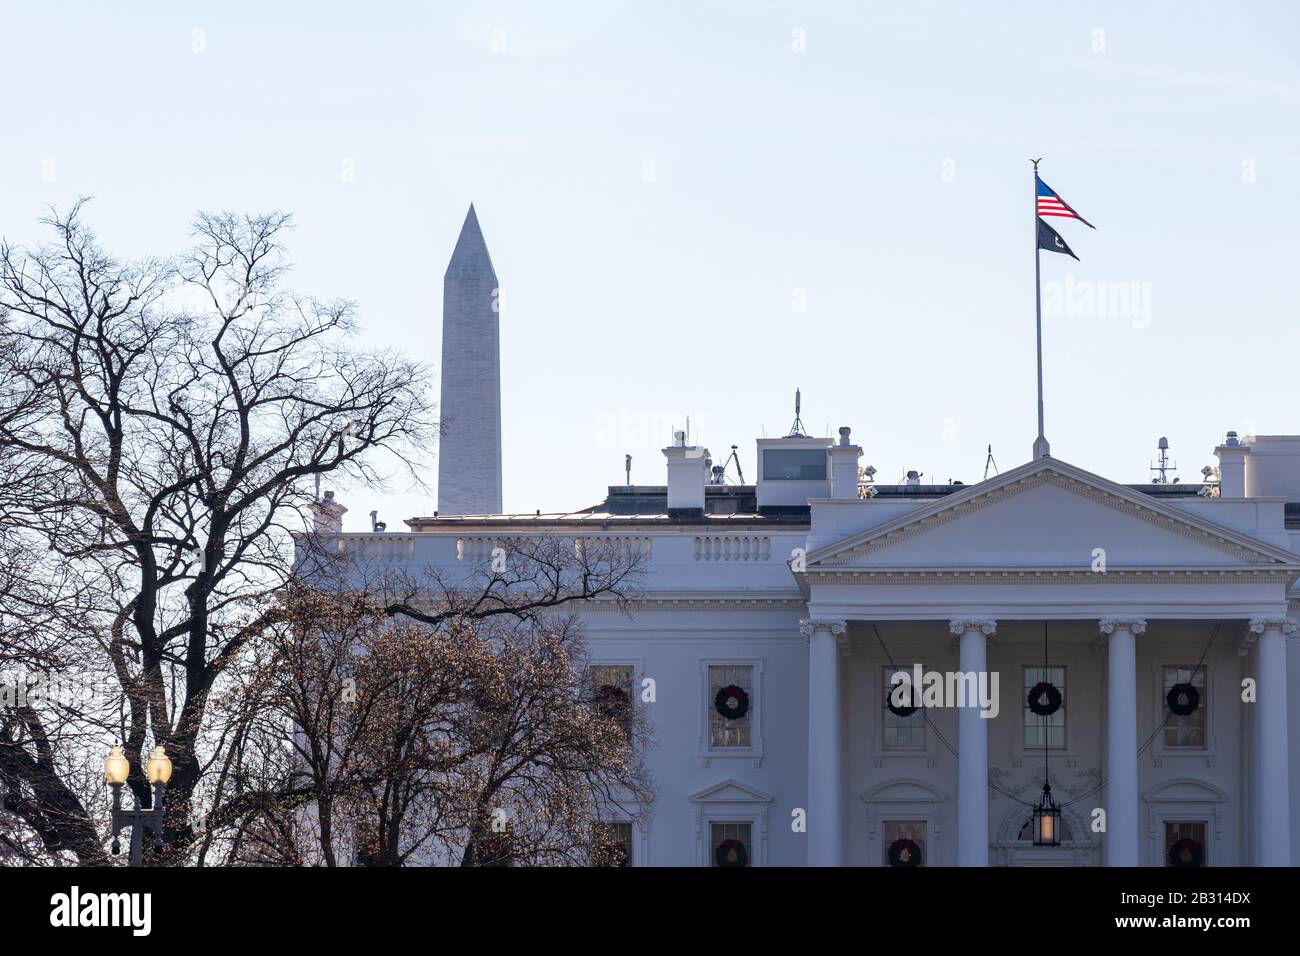 Close-up of The White House, north side seen on a clear day with the Washington Monument in the background. Stock Photo